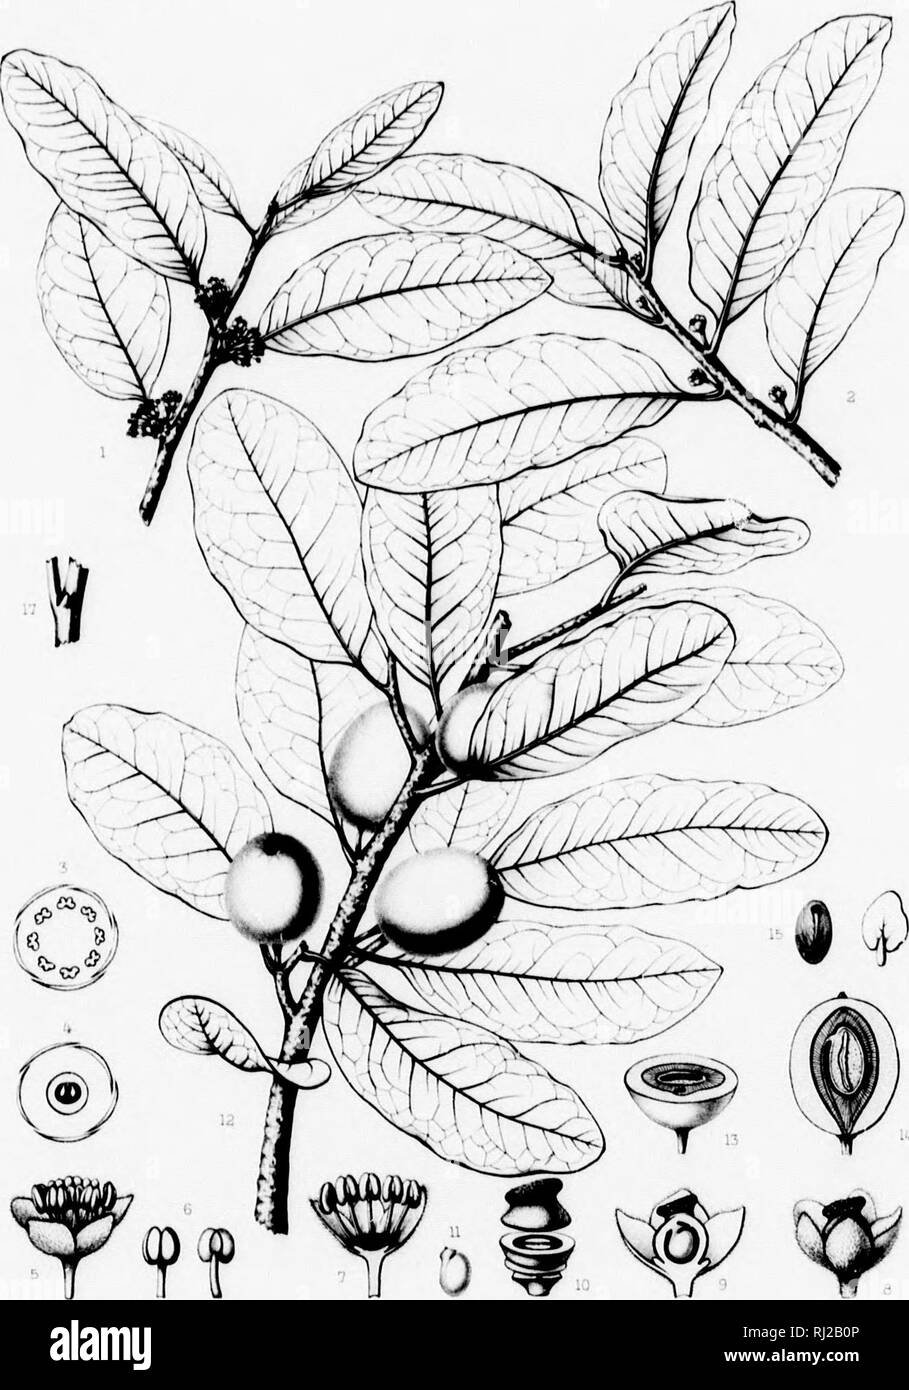 . The silva of North America [microform] : a description of the tree which grow naturally in North America exclusive of Mexico. Trees; Trees; Dicotyledons; Arbres; Arbres; DicotylÃ©dones. 1*11 â¢â¢1- â It .lii!I U. Pisonias, thi I Wjfe piii-t i)&gt; ii keys. Dm. !k-wlllt.i- liui I, i&gt;y l;r. J. I â &quot;'â */ 1 'ft-'' â &amp; SiWd 111' NoHh AmciiLa, Tab. CCCVll. rSFuu;&quot;! ,U DRYPETES KEYENSIS A. Hti u â ftnta- .i^ ruft&lt;nu.Pitr:,i. U I il i 1- â v. I ' ; 1.. Please note that these images are extracted from scanned page images that may have been digitally enhanced for readability - co Stock Photo